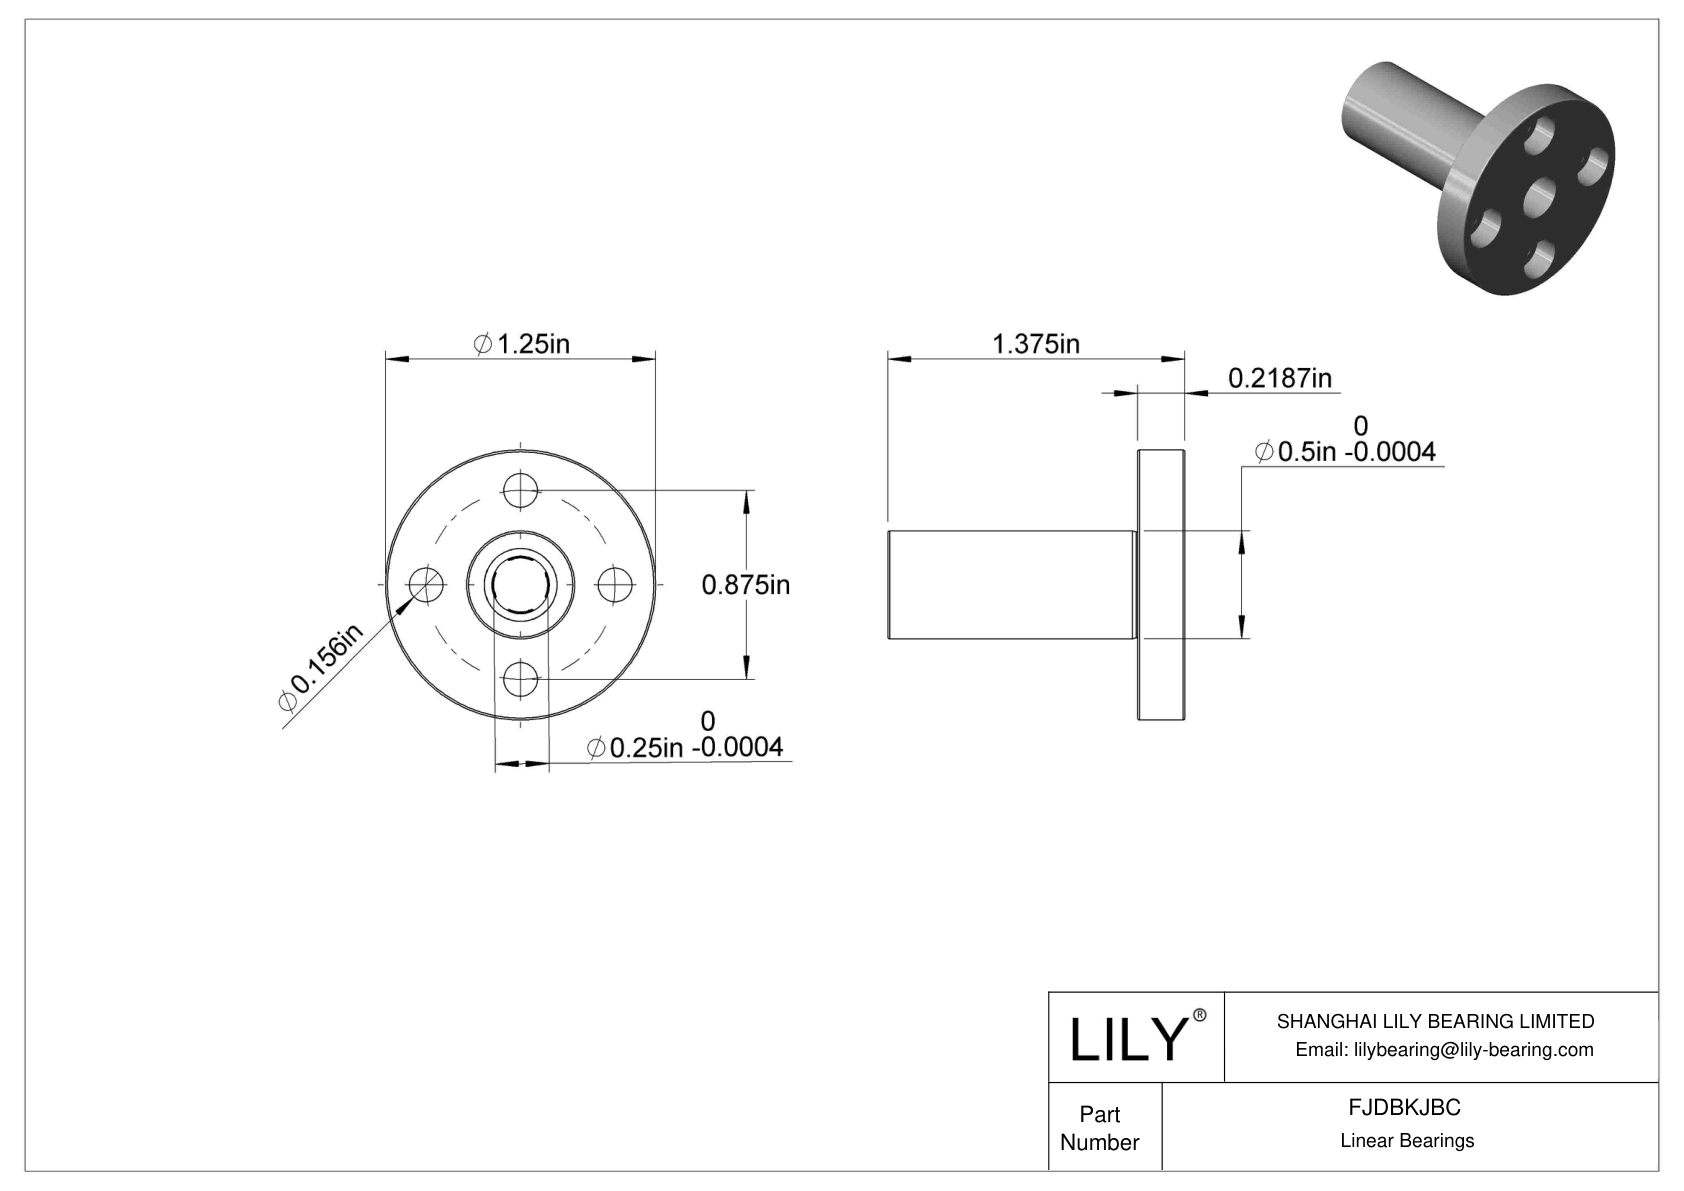 FJDBKJBC Corrosion-Resistant Flange-Mounted Linear Ball Bearings cad drawing